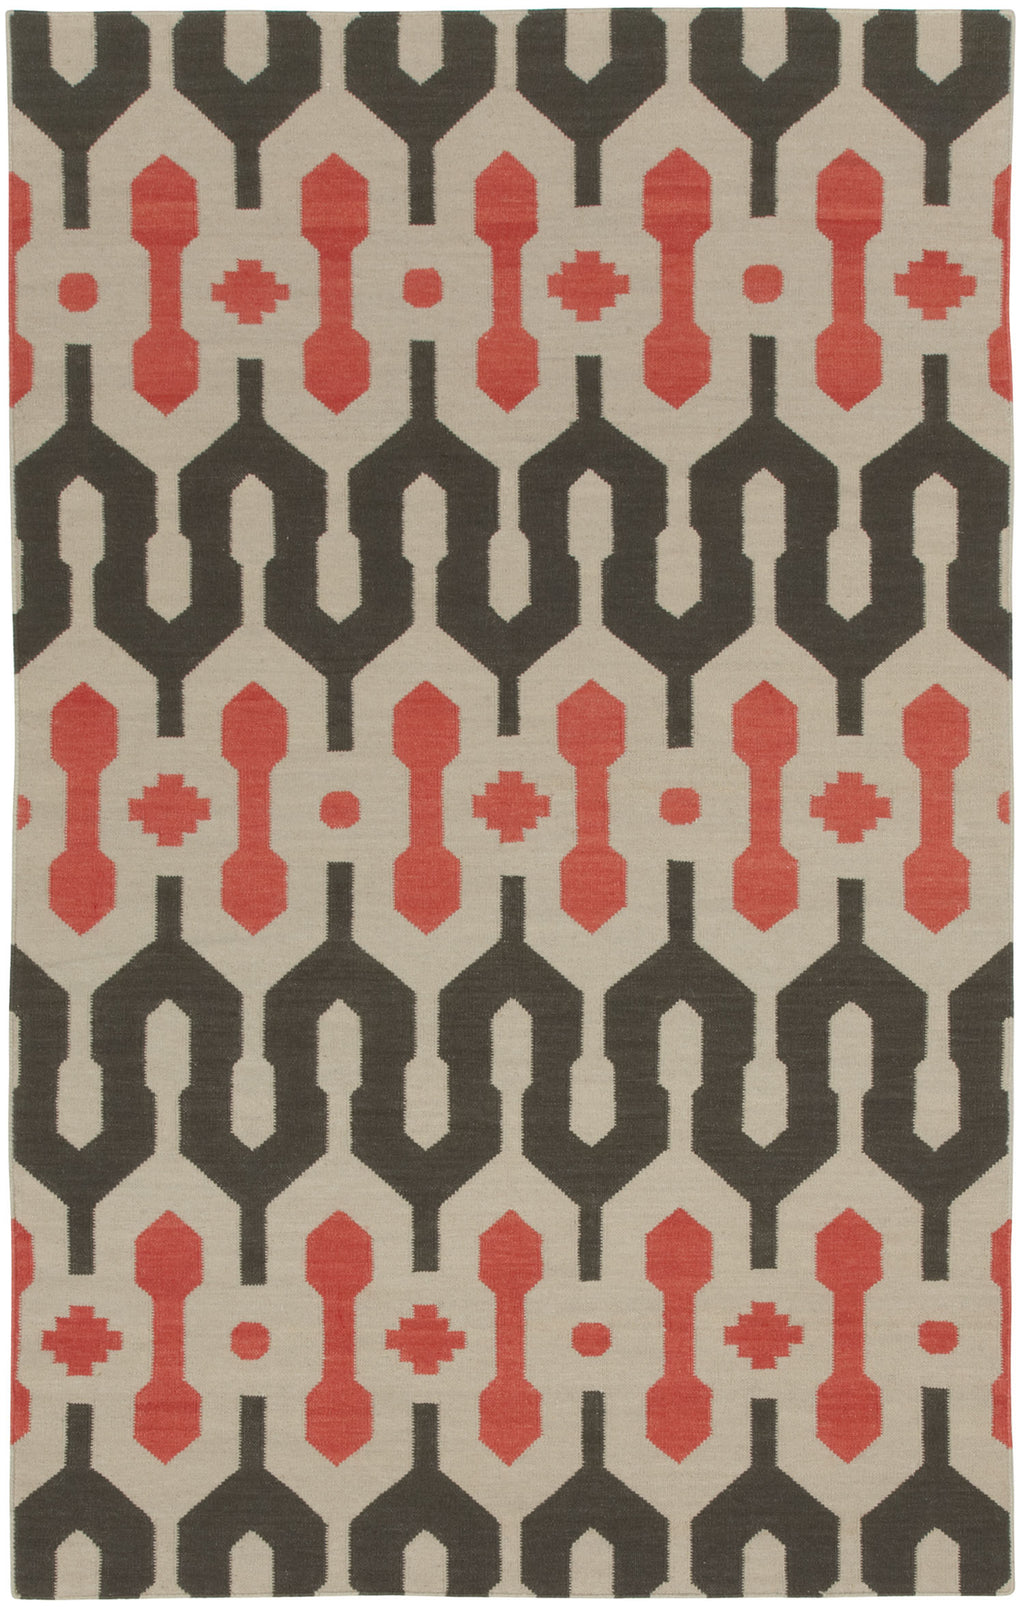 Capel Spain 3633 Smoke Apricot 350 Area Rug by Genevieve Gorder main image